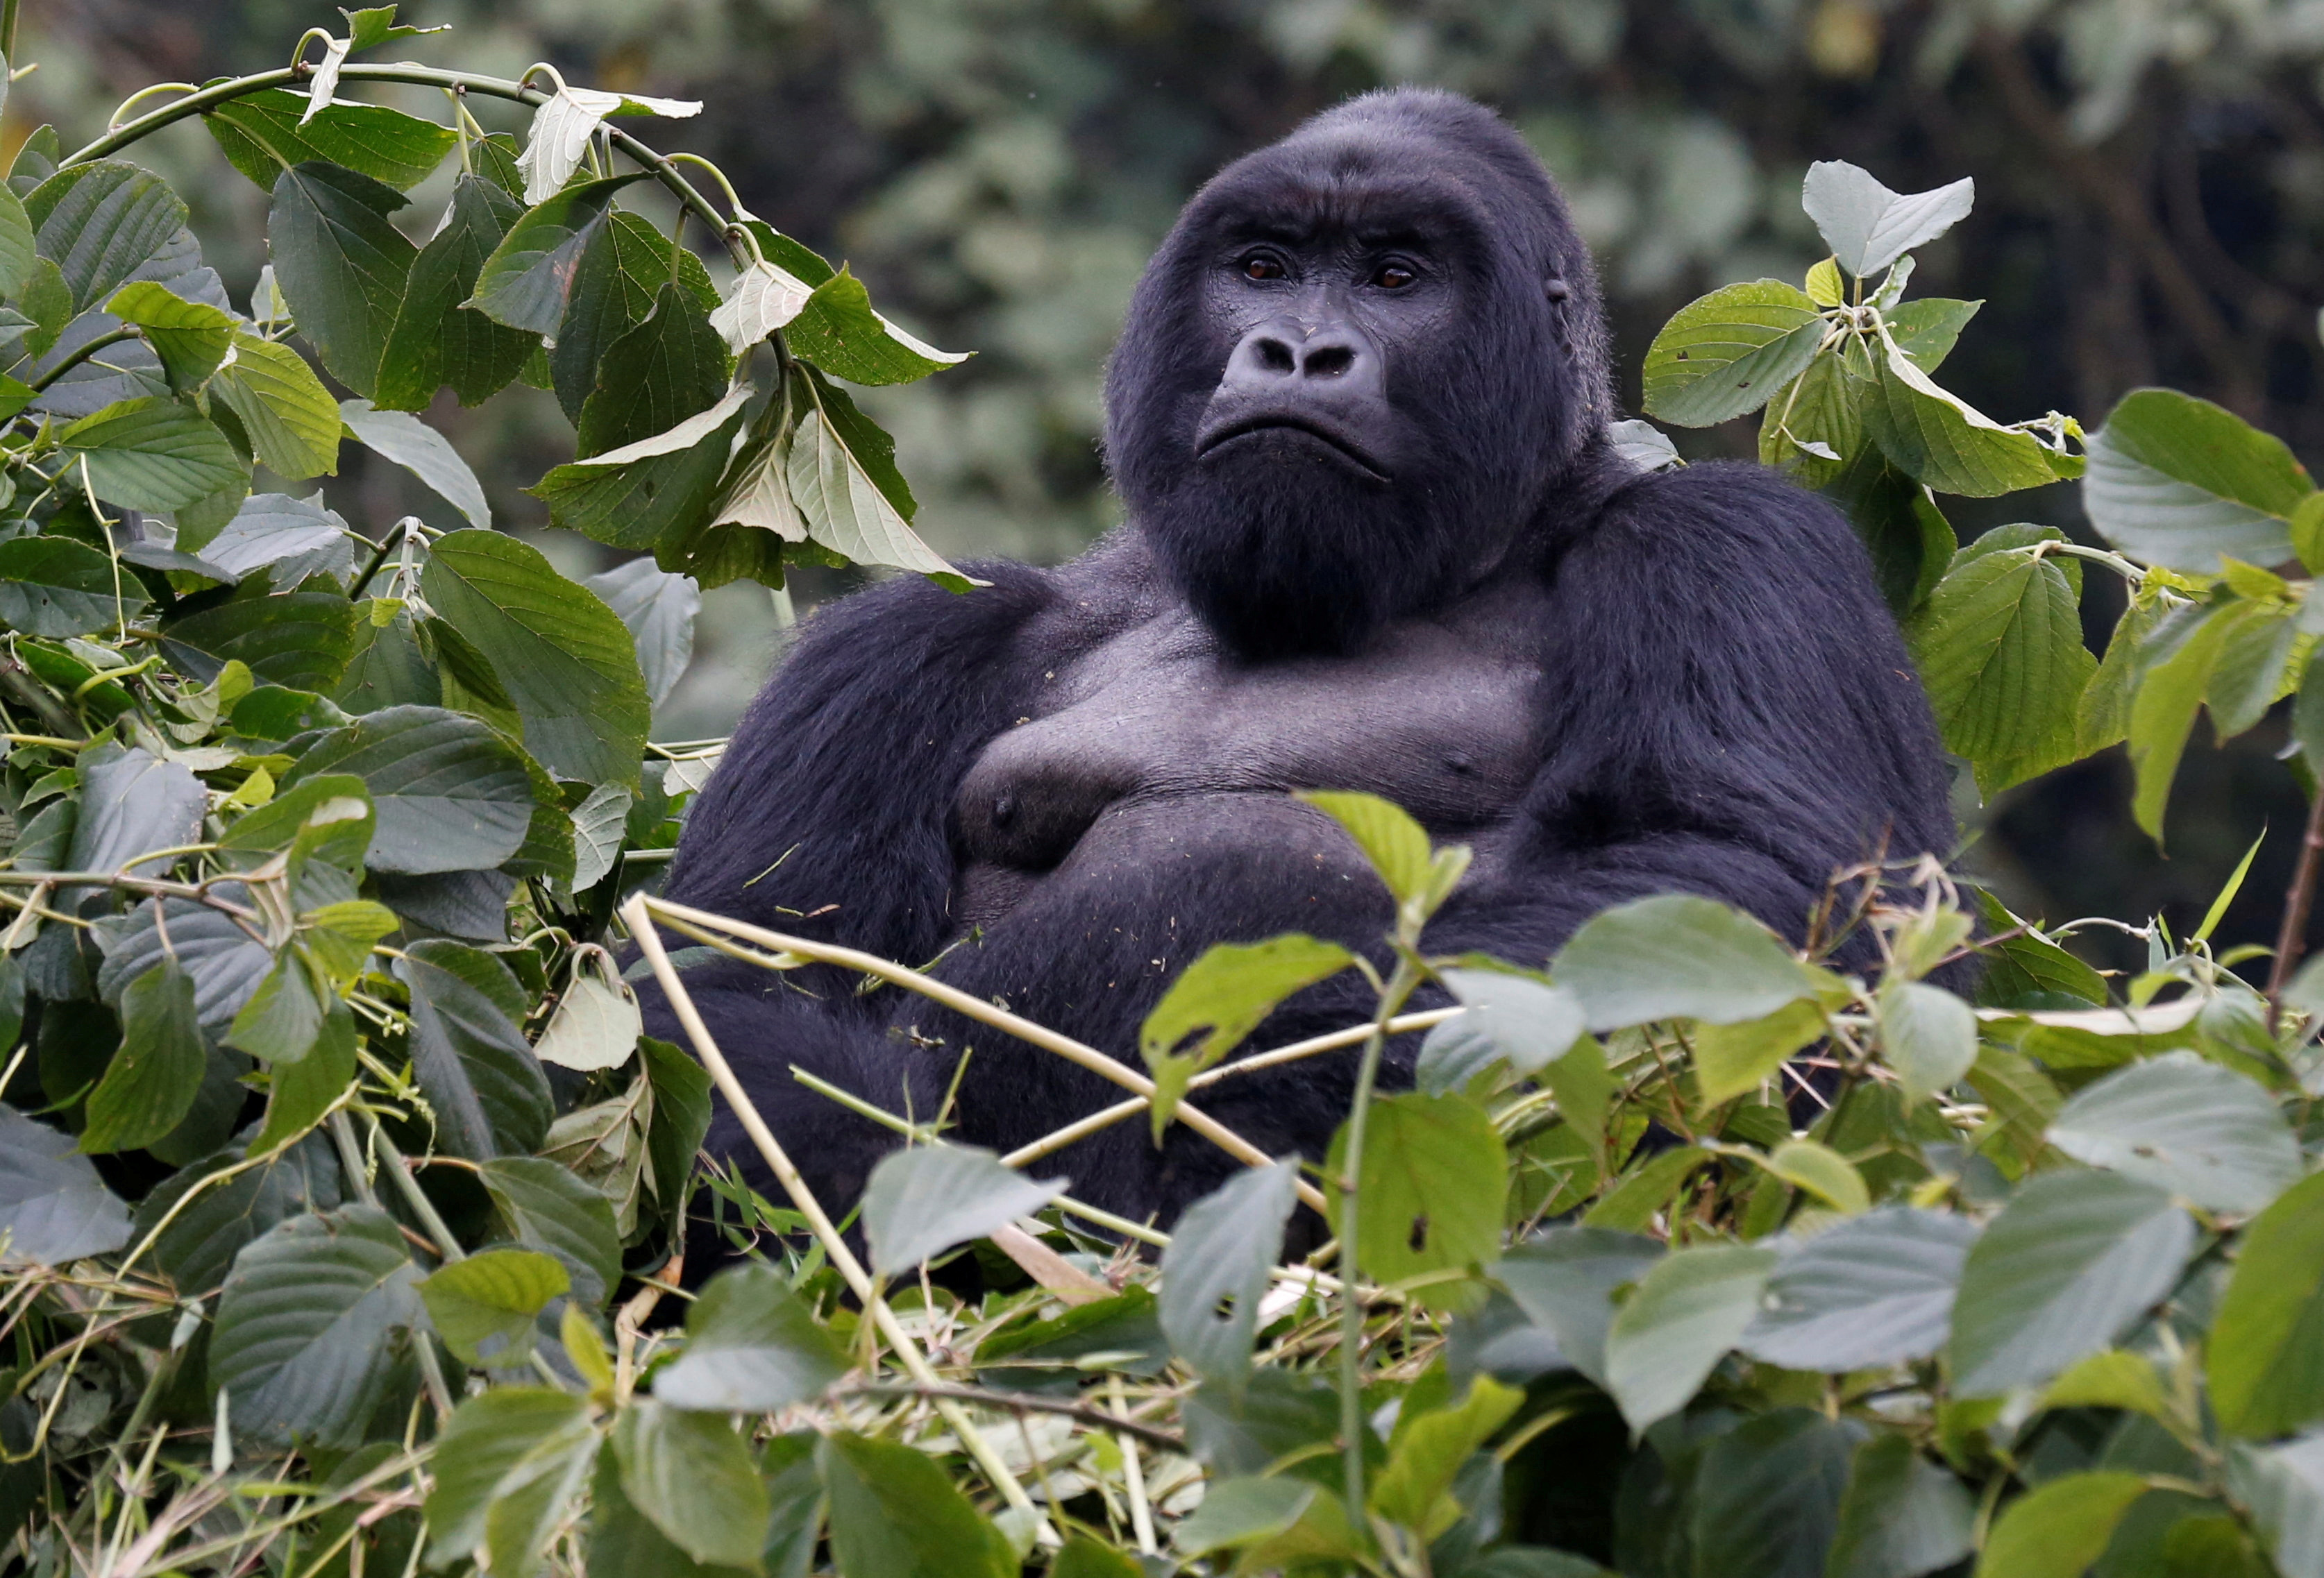 An endangered silverback high mountain gorilla from Sabyinyo family rests atop trees inside the forest in the Volcanoes National Park near Kinigi